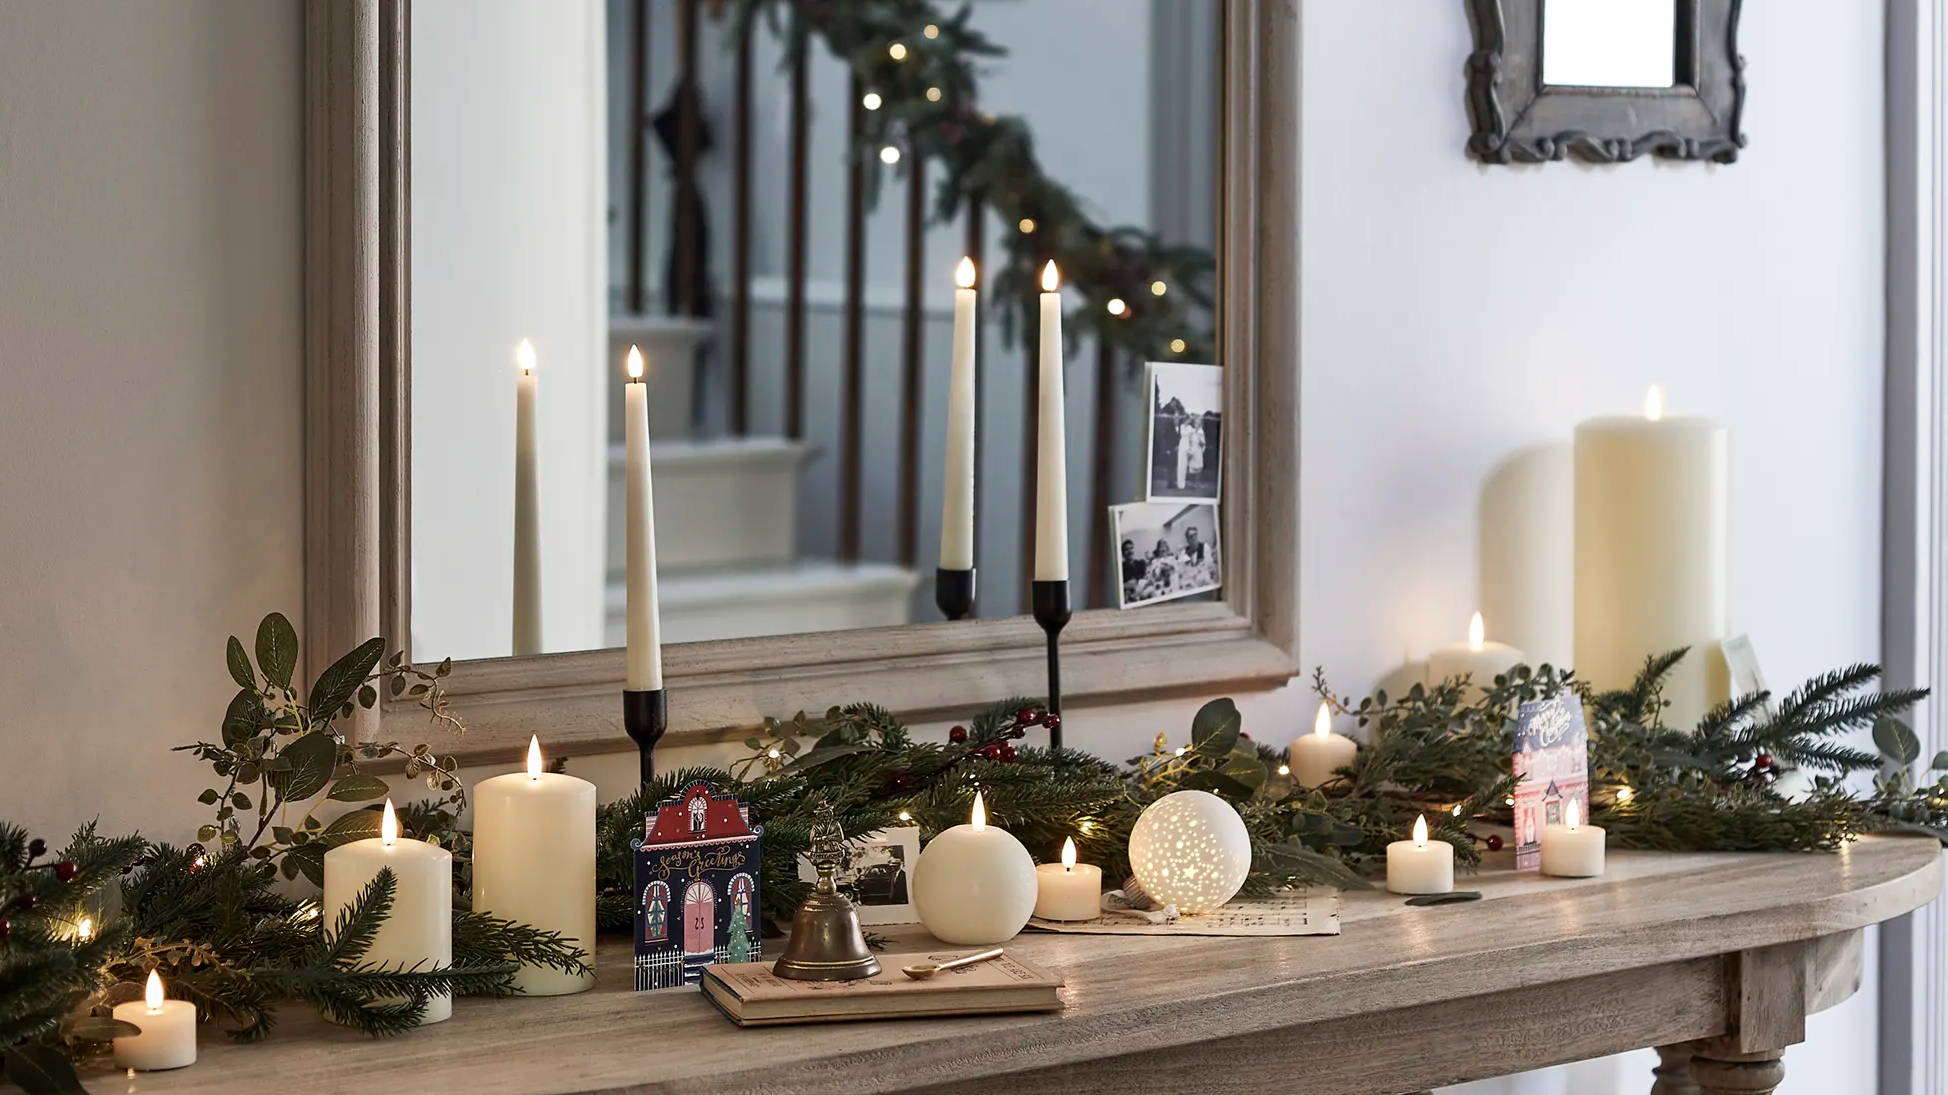 A mantlepiece with candles, a garland and Christmas decorations.